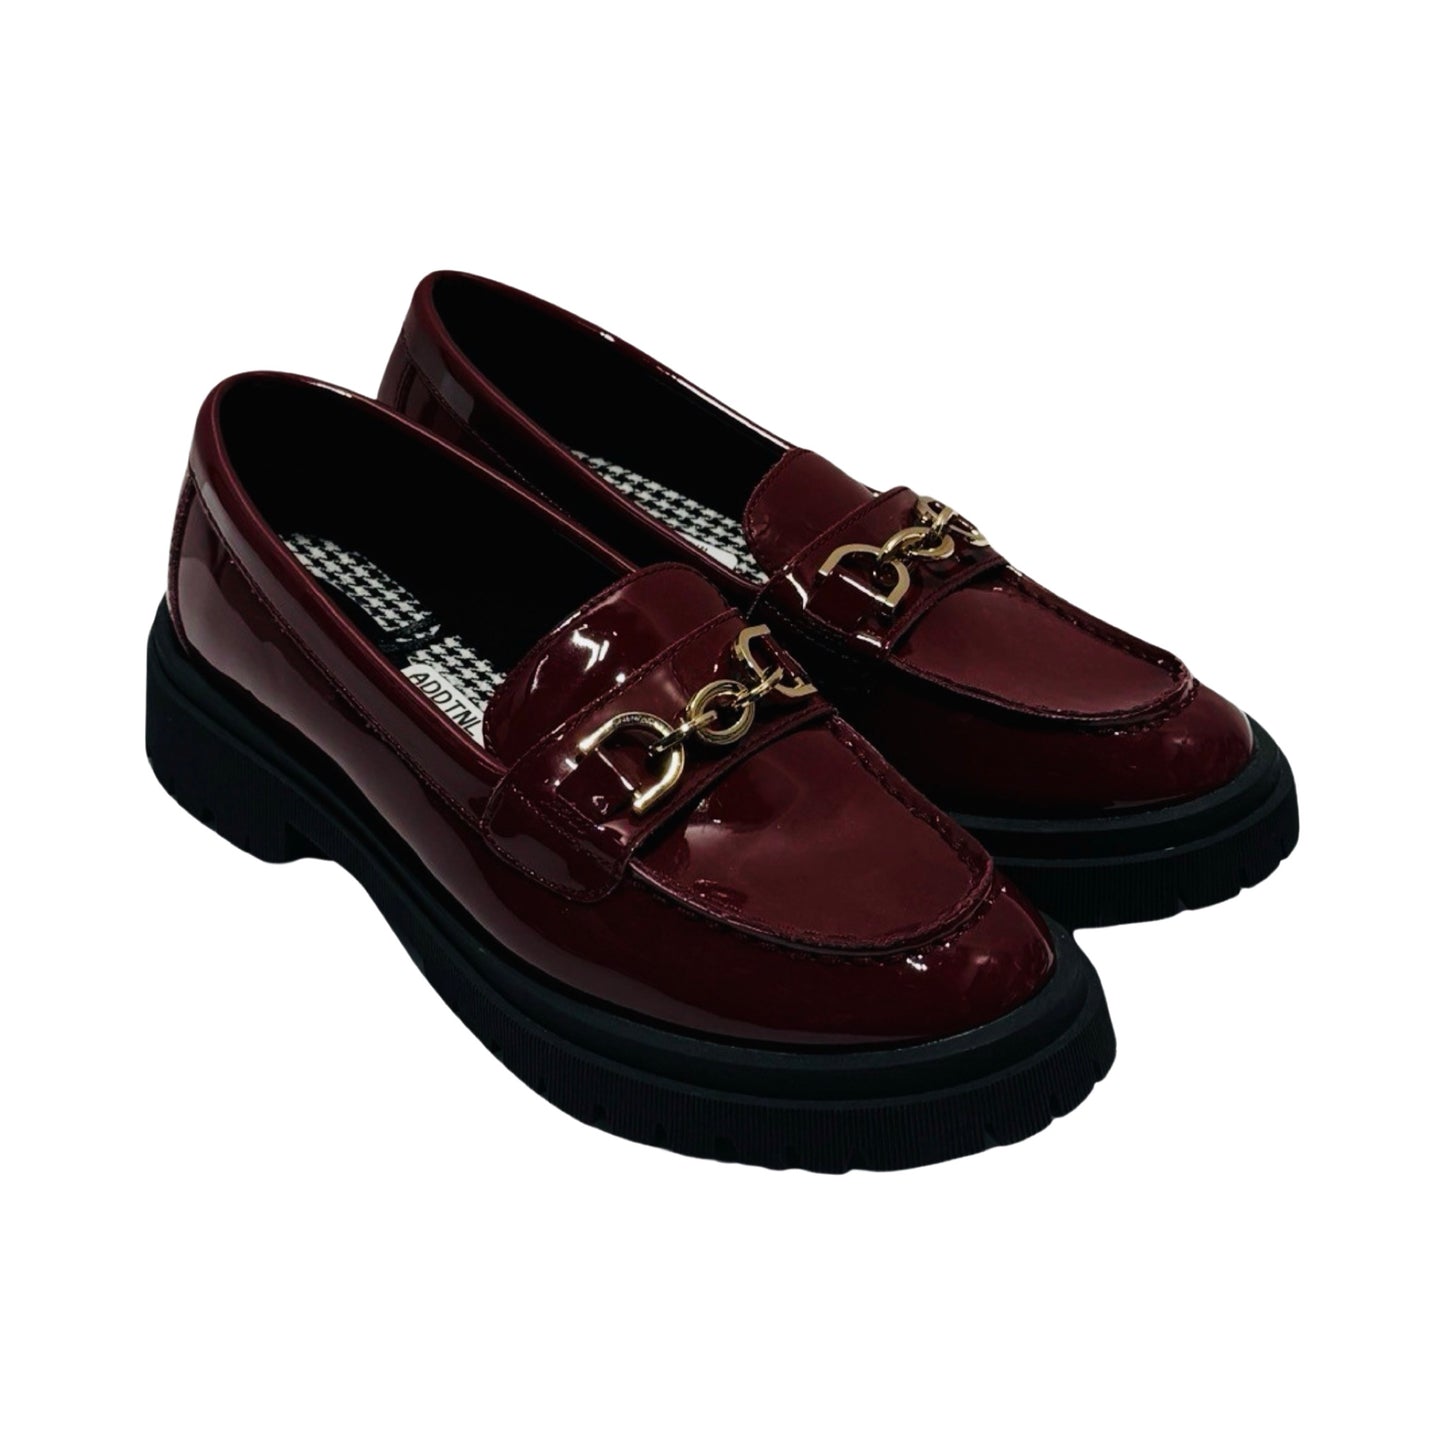 Shoes Flats Loafer Oxford By Seychelles  Size: 8.5